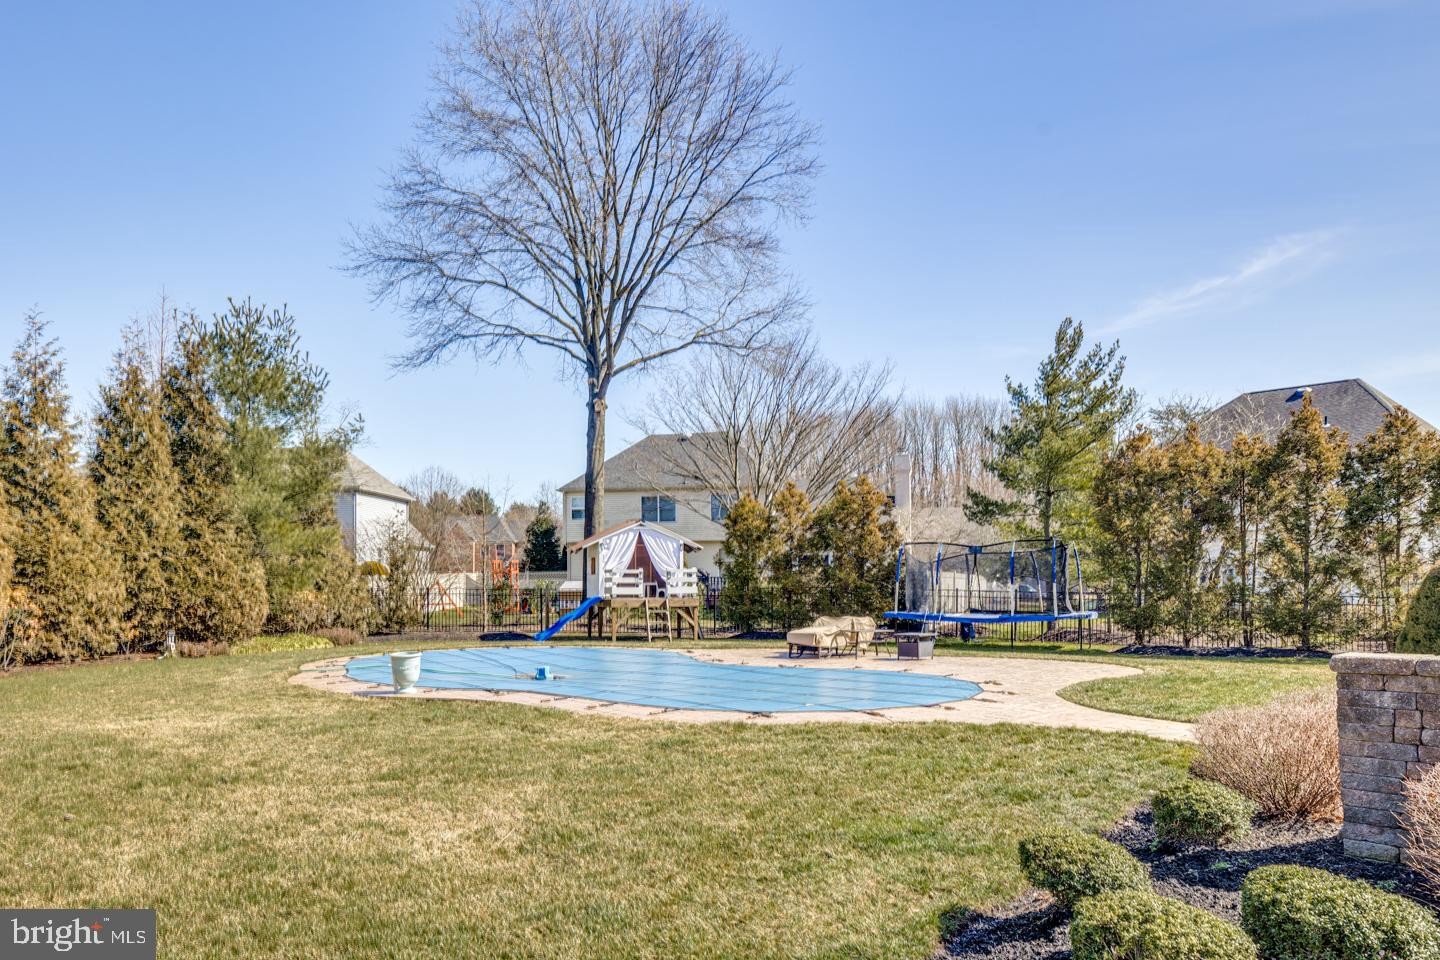 44. 3 Bellwether Ct